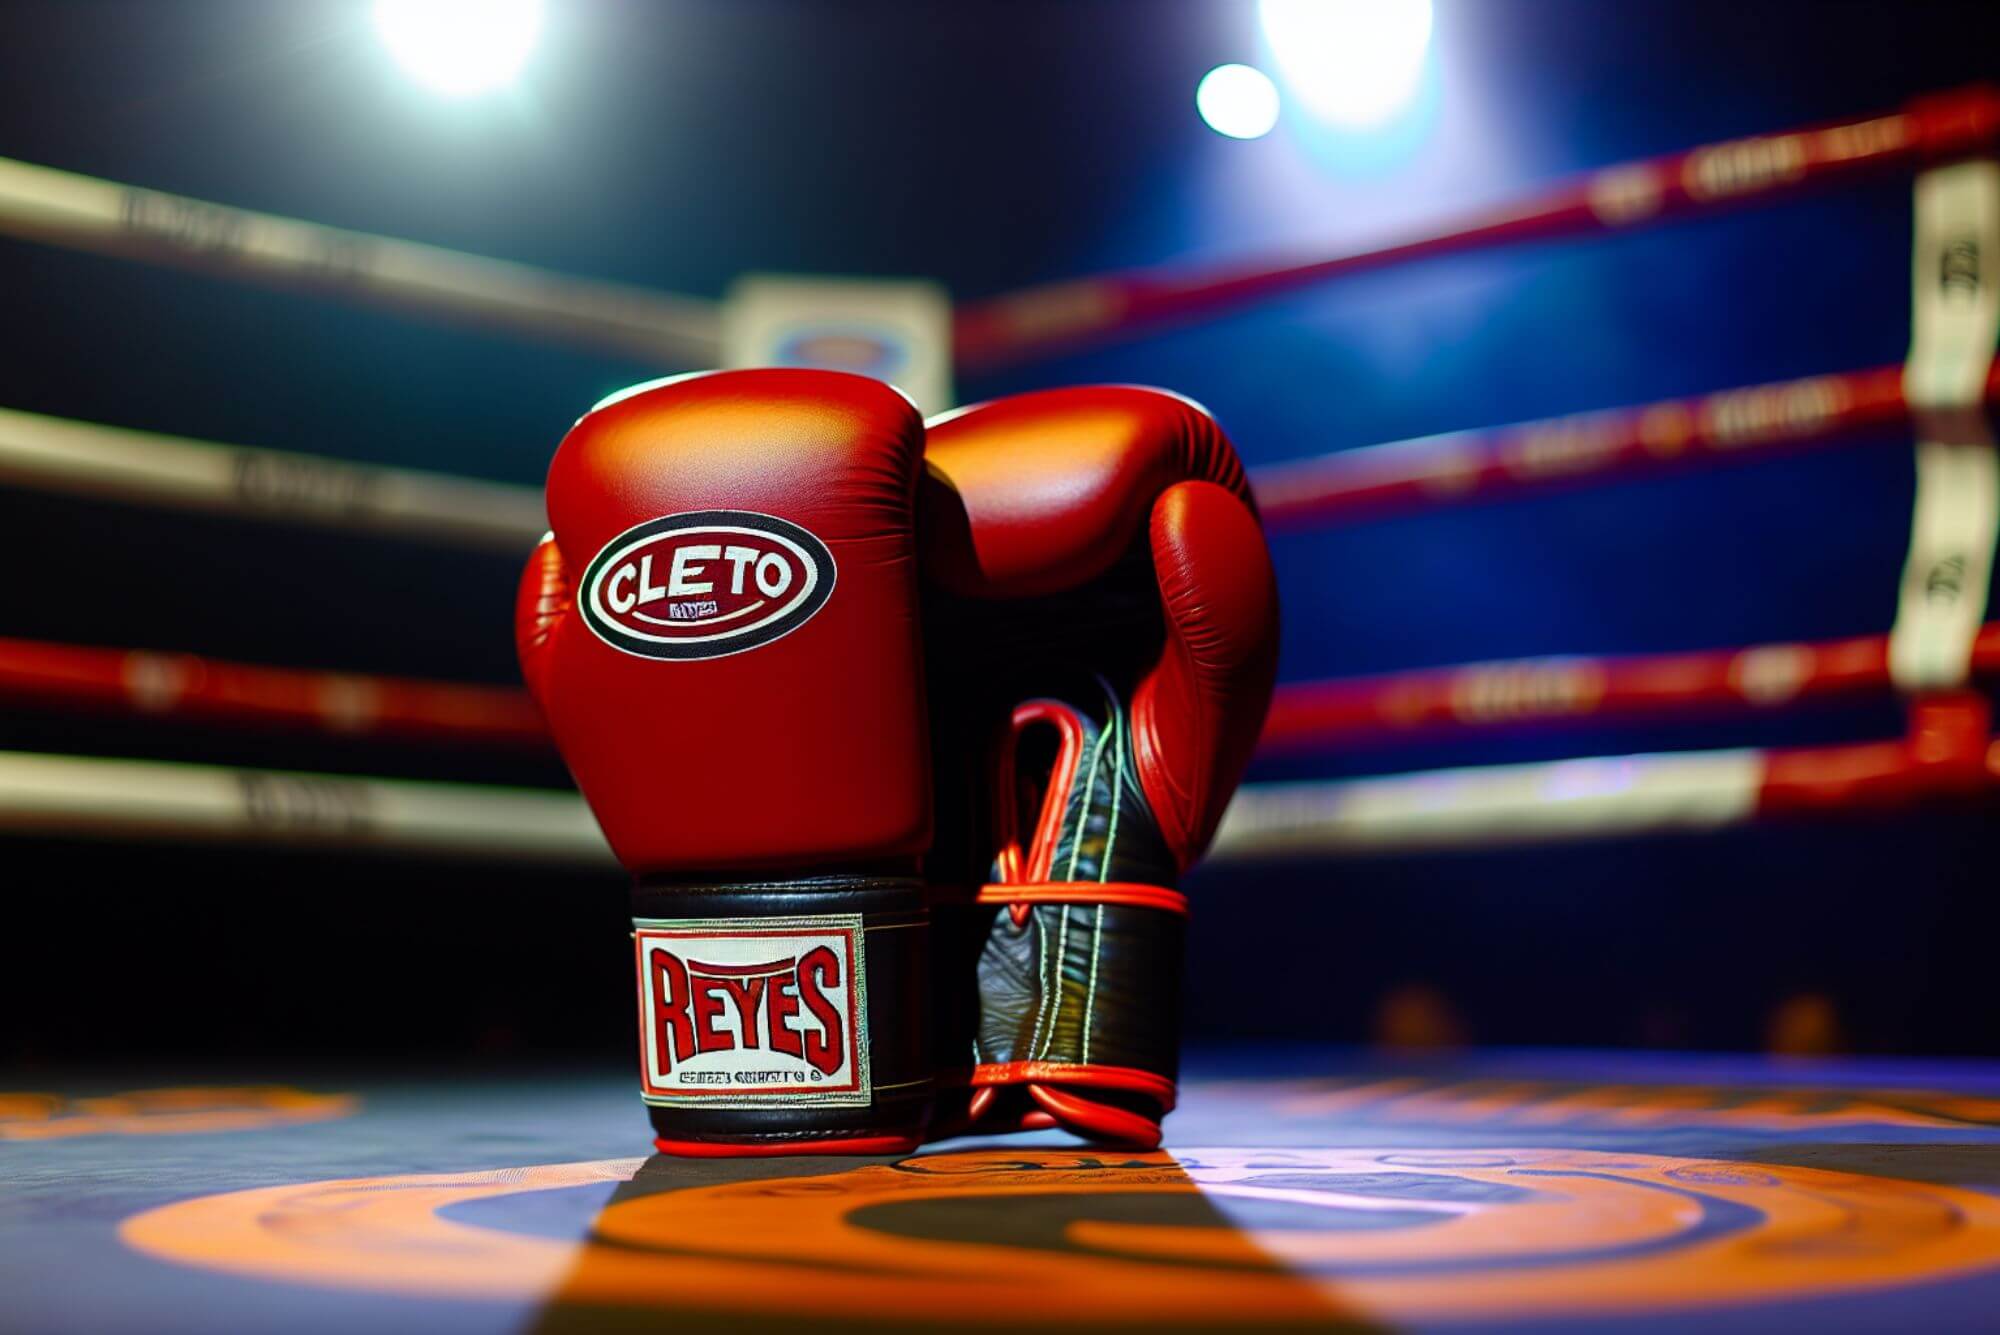 Cleto Reyes training gloves displayed in a professional boxing ring